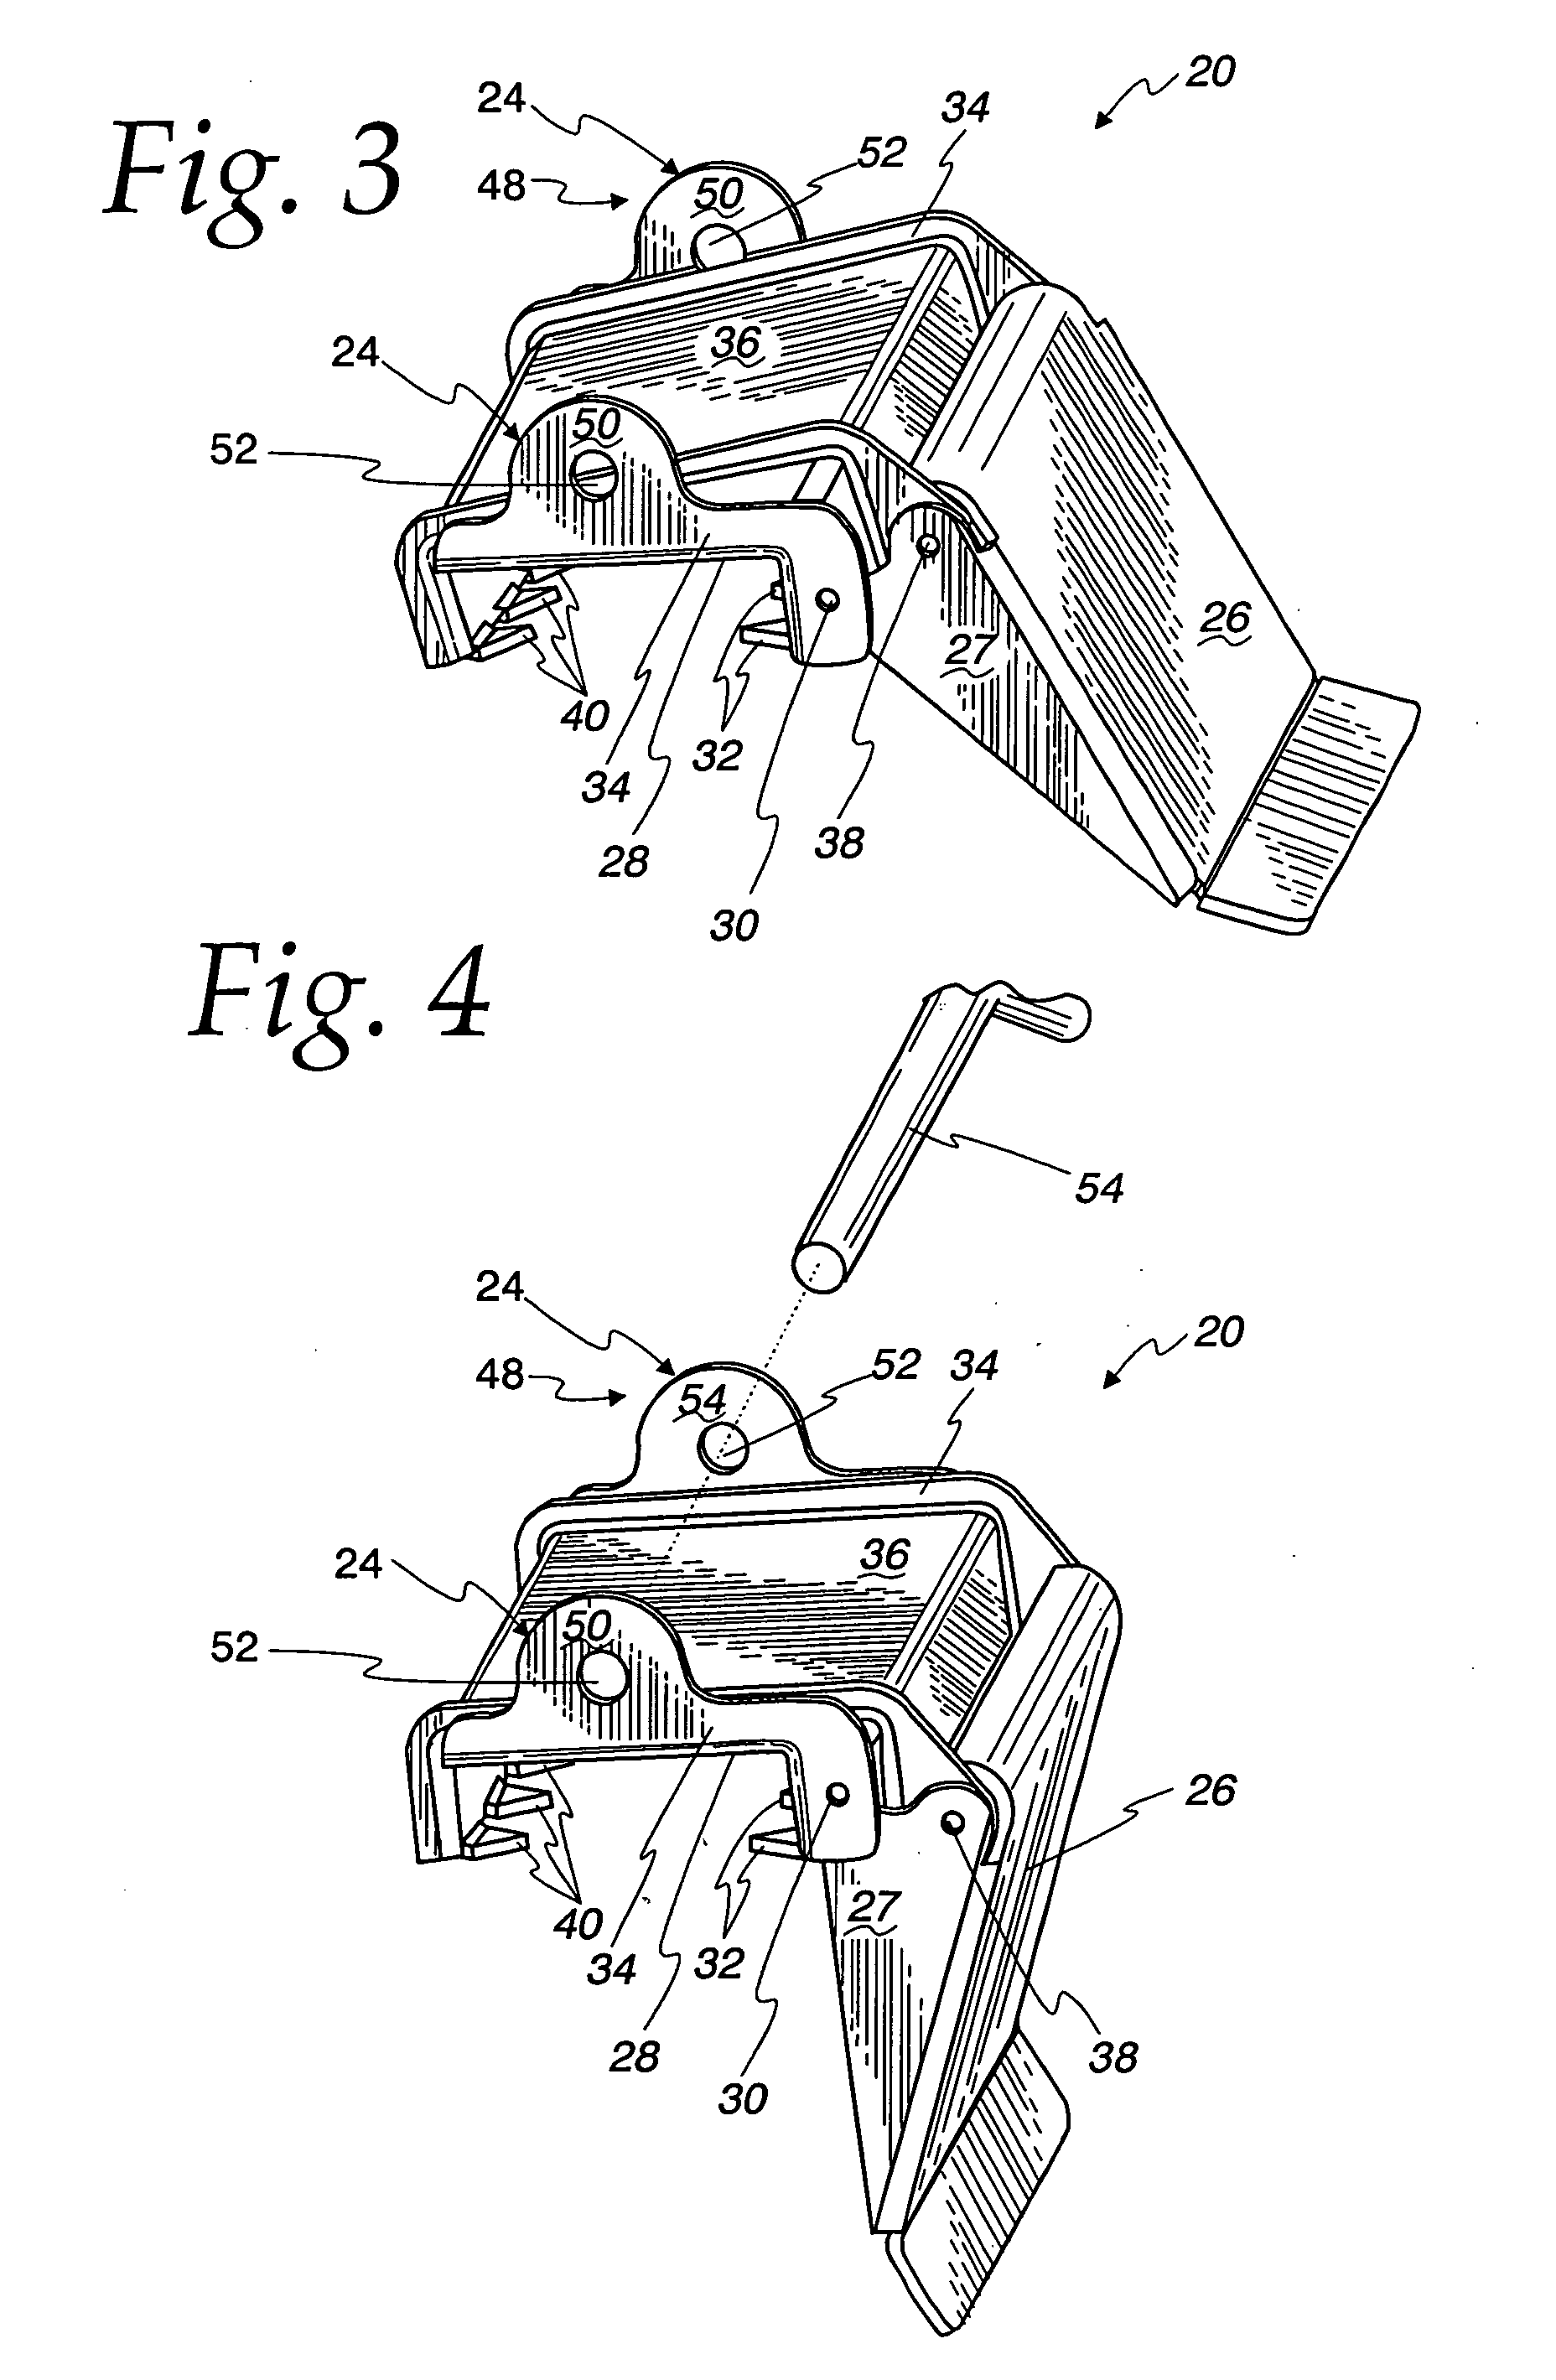 Mounting clip and related modular storage system